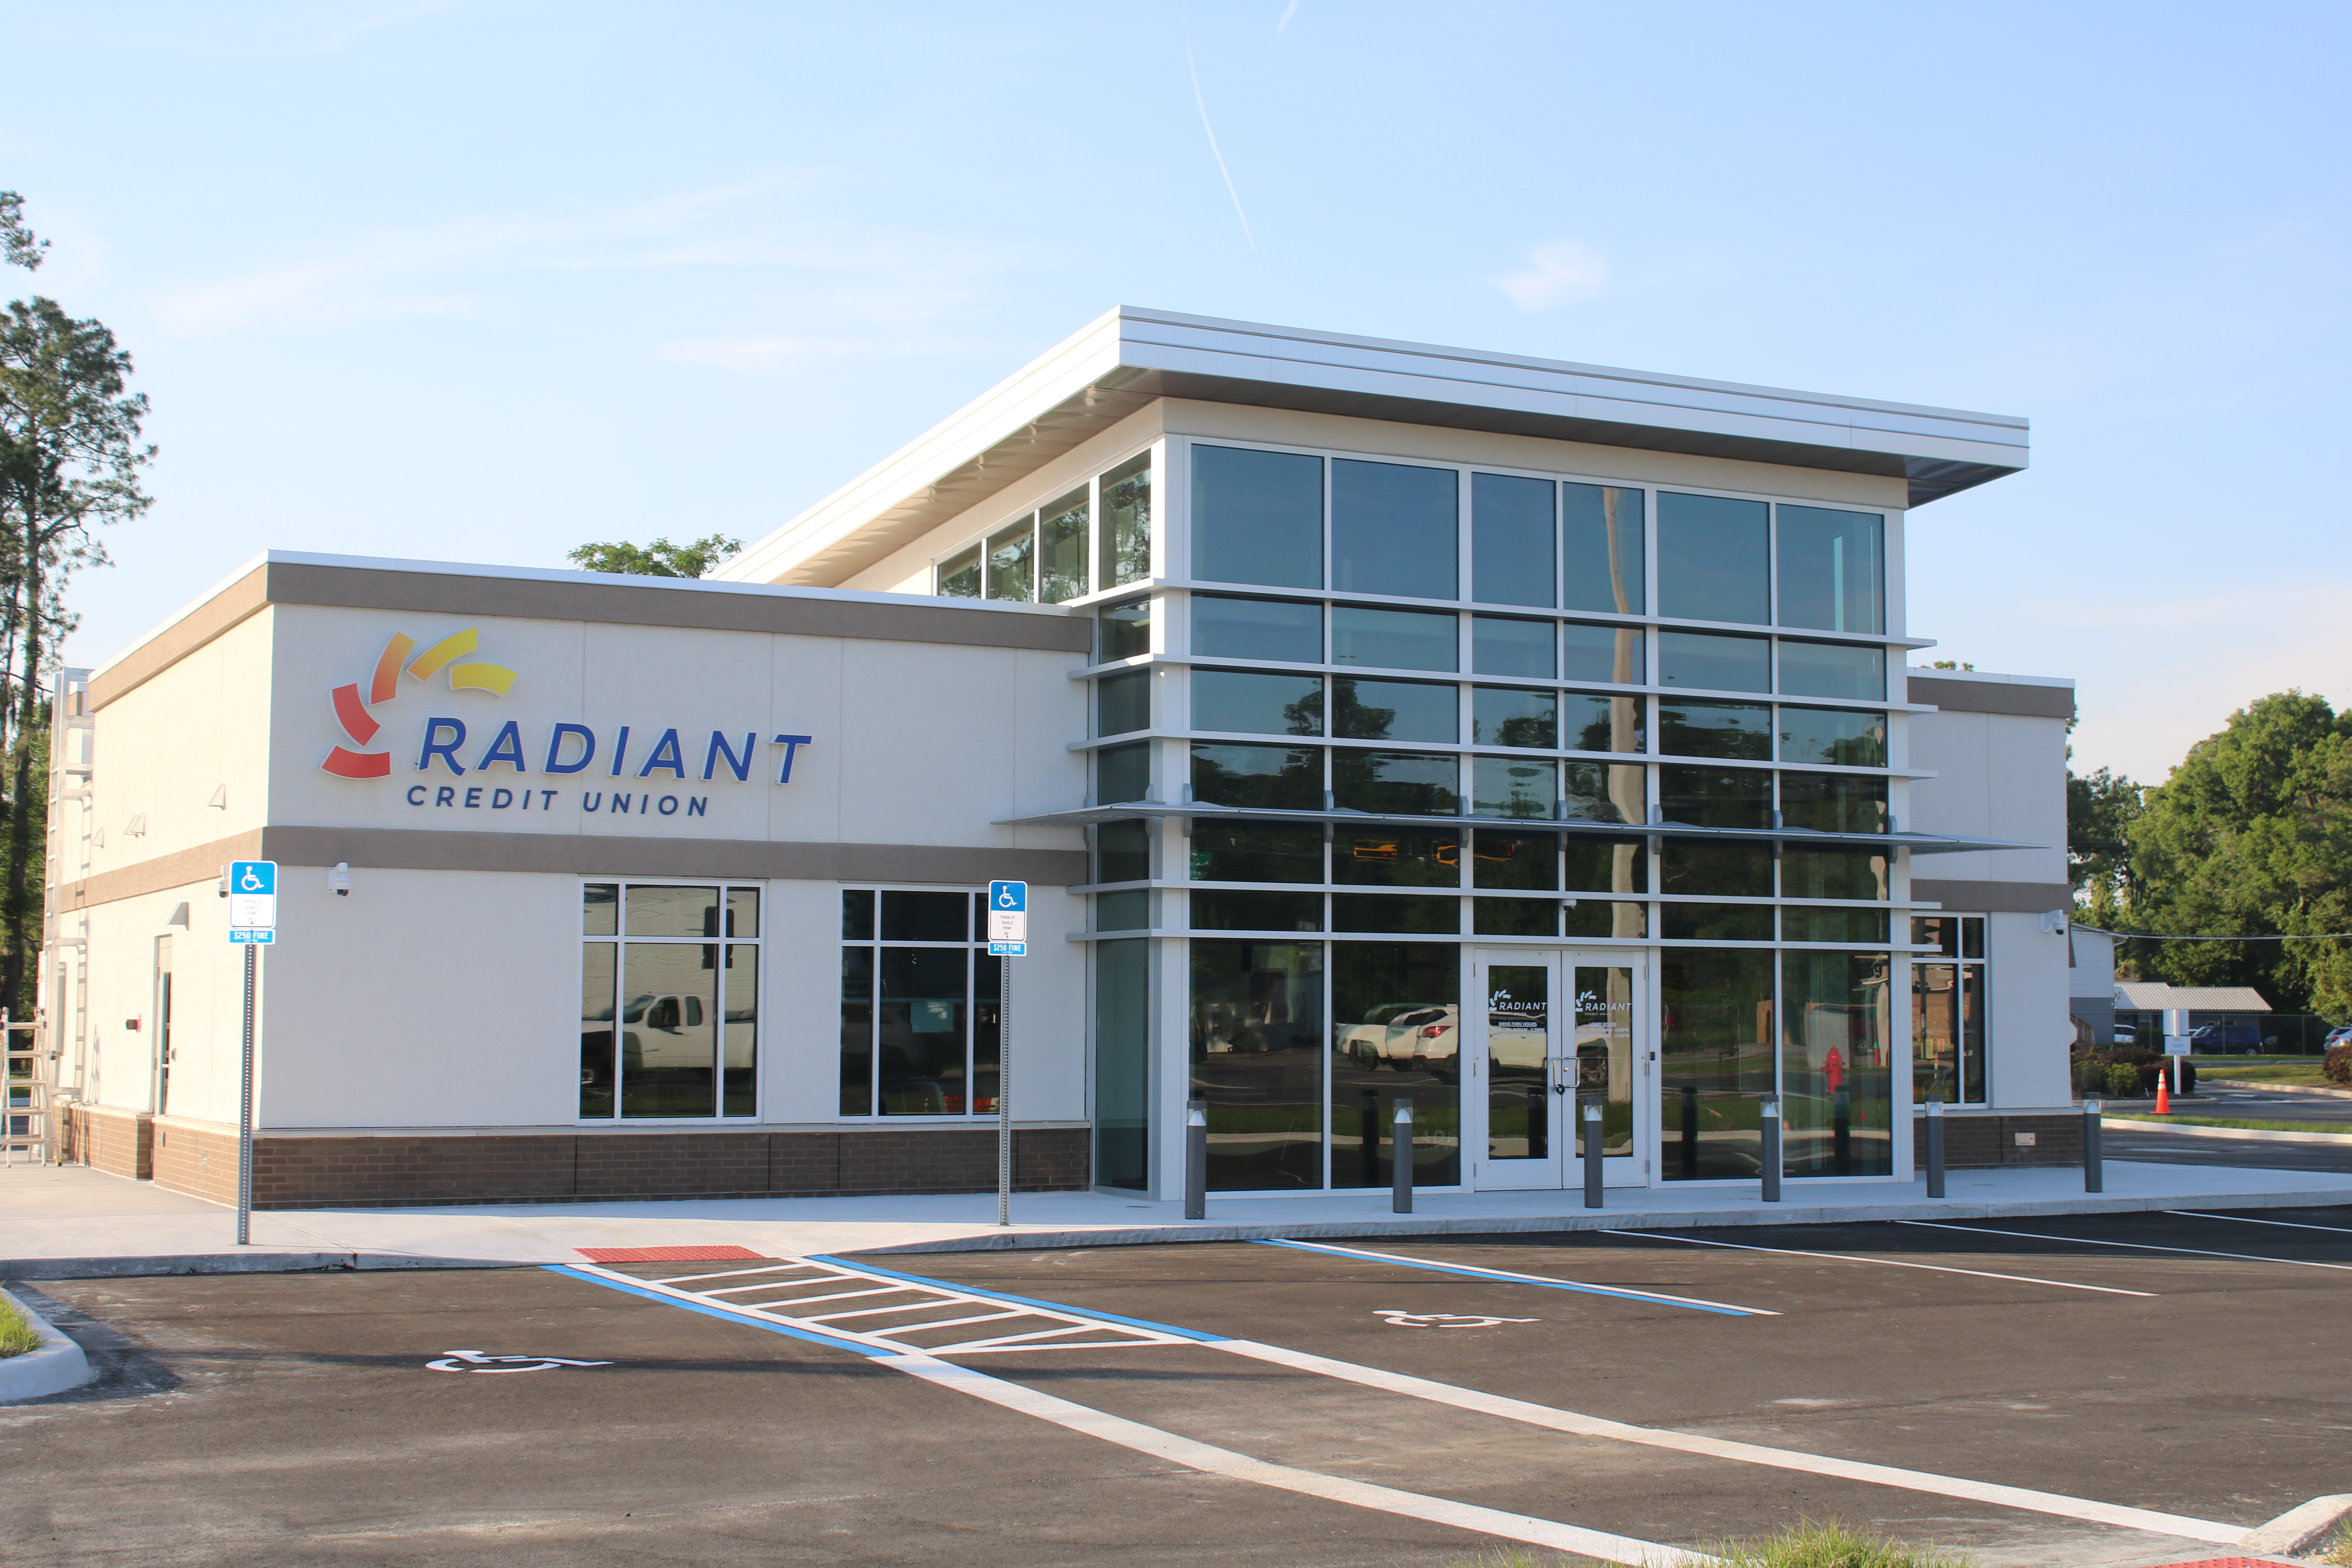 Radiant Credit Union’s new building at 1688 W. U.S. Highway 90 will open the beginning of next week. The credit union will close its current branch today to start the move to the new location. (TONY BRITT/Lake City Reporter)